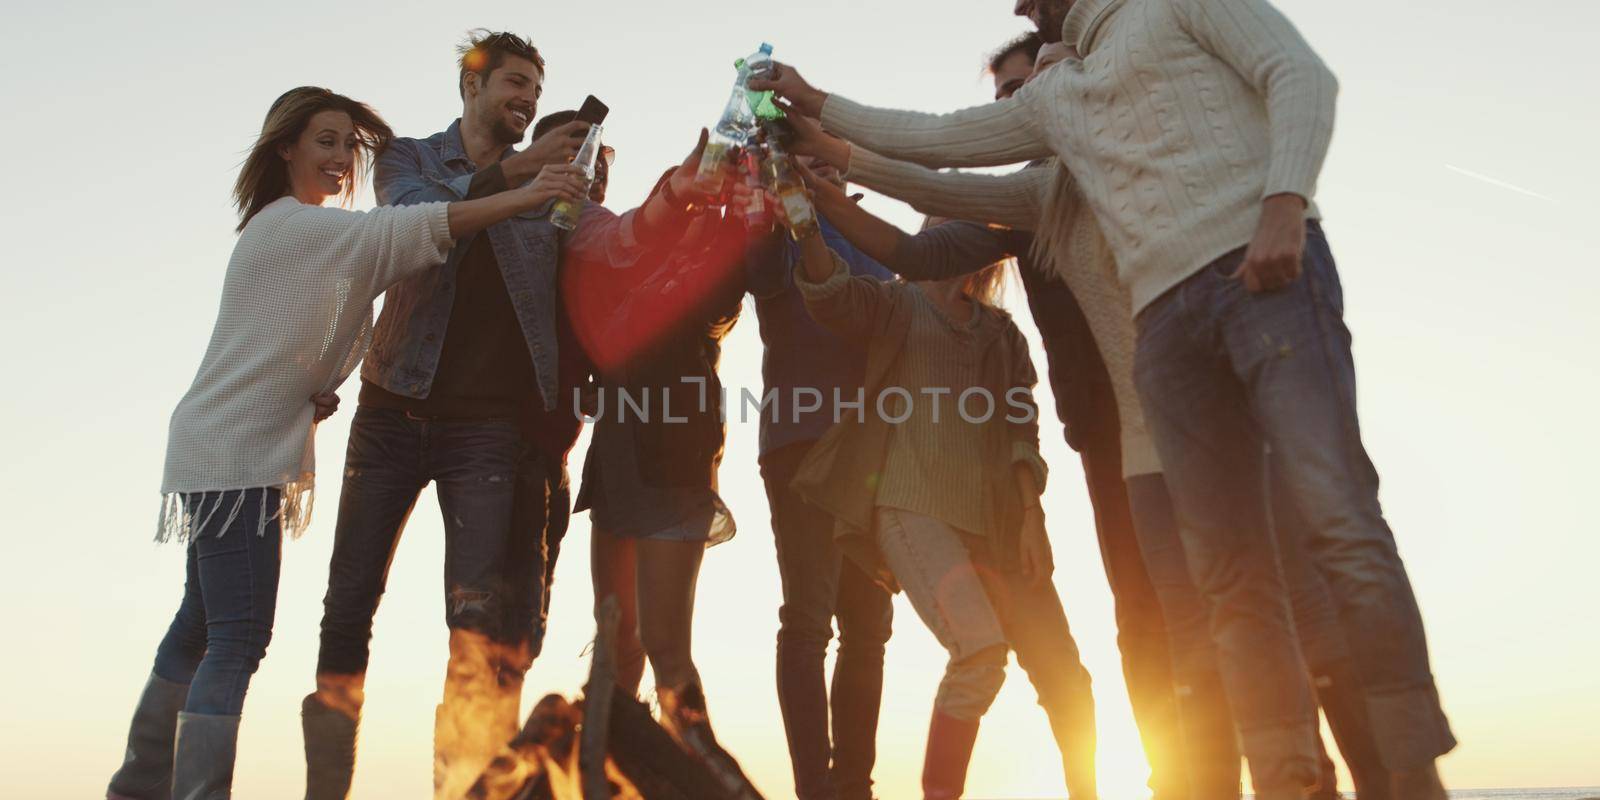 Friends on beach party drinking beer and having fun by dotshock